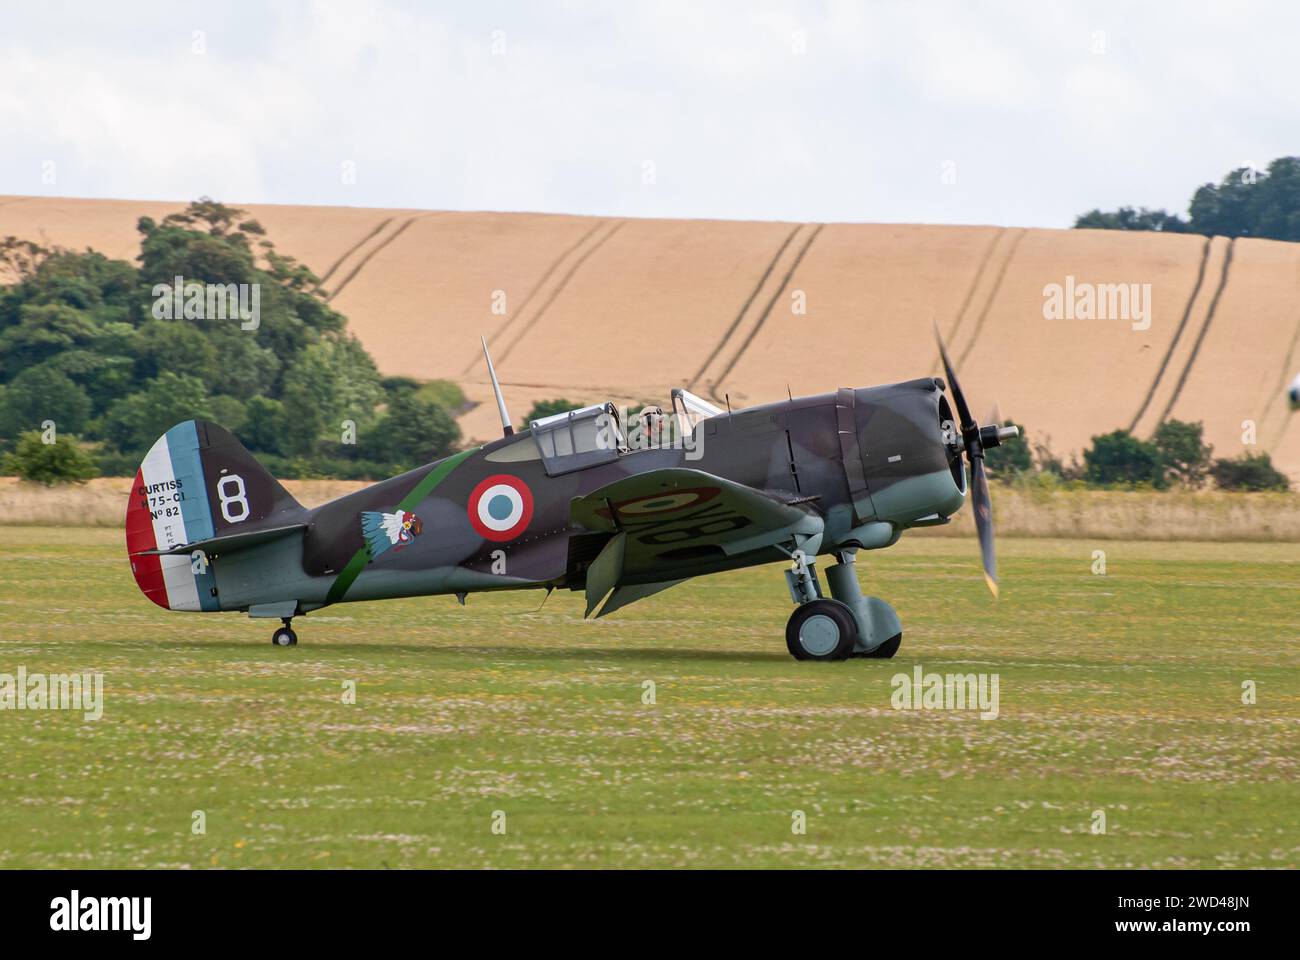 Curtiss P-36 Hawk WW2 fighter plane (tail number 82-ALA) on the runway at Duxford airshow in the United Kingdom. Stock Photo